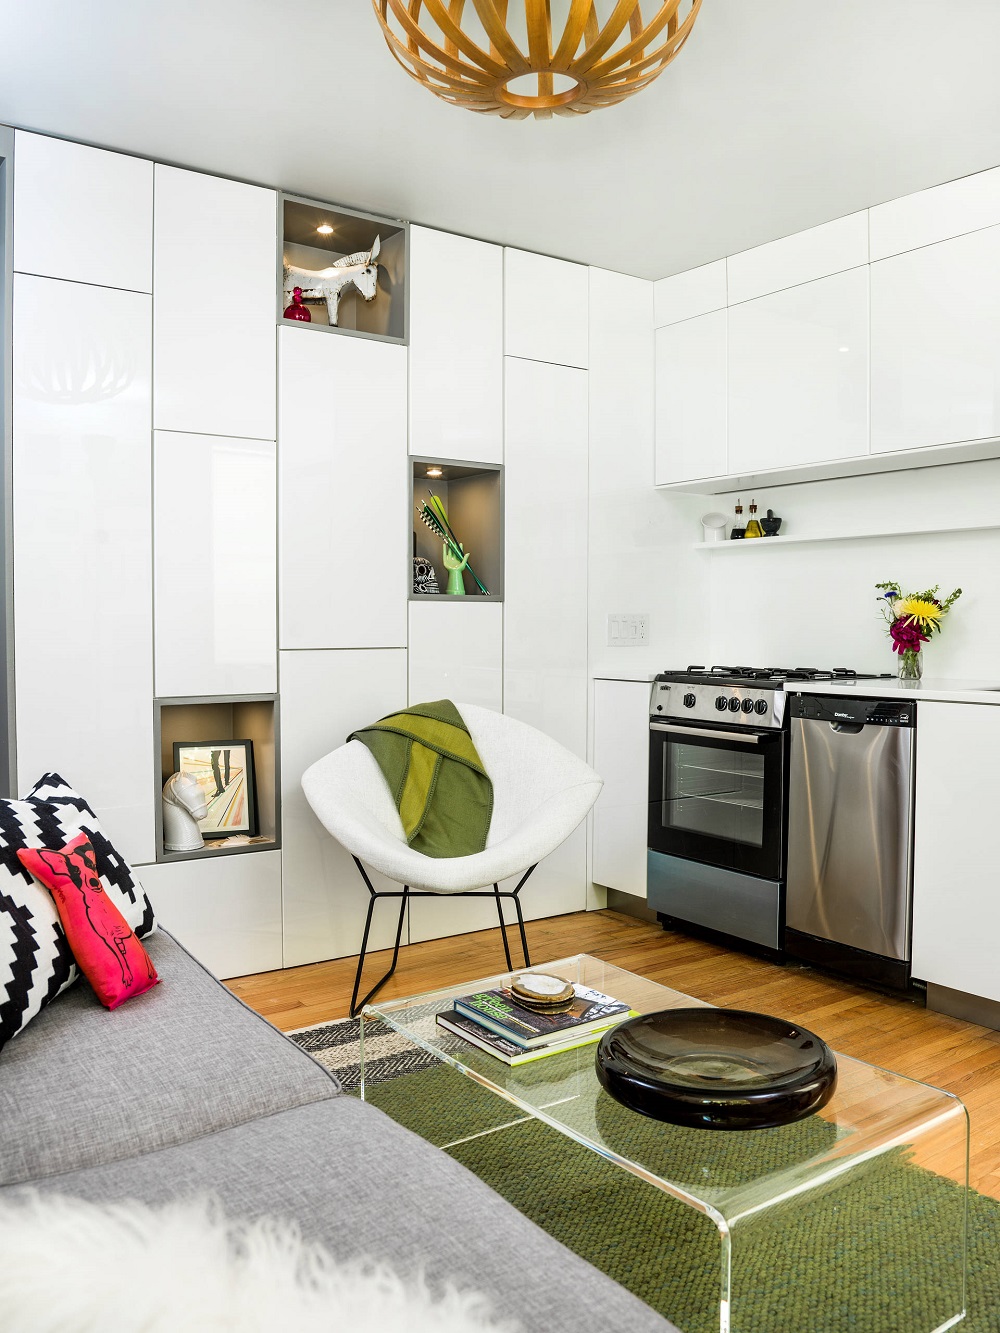 k12 What's an efficiency apartment and why's it different from a studio?